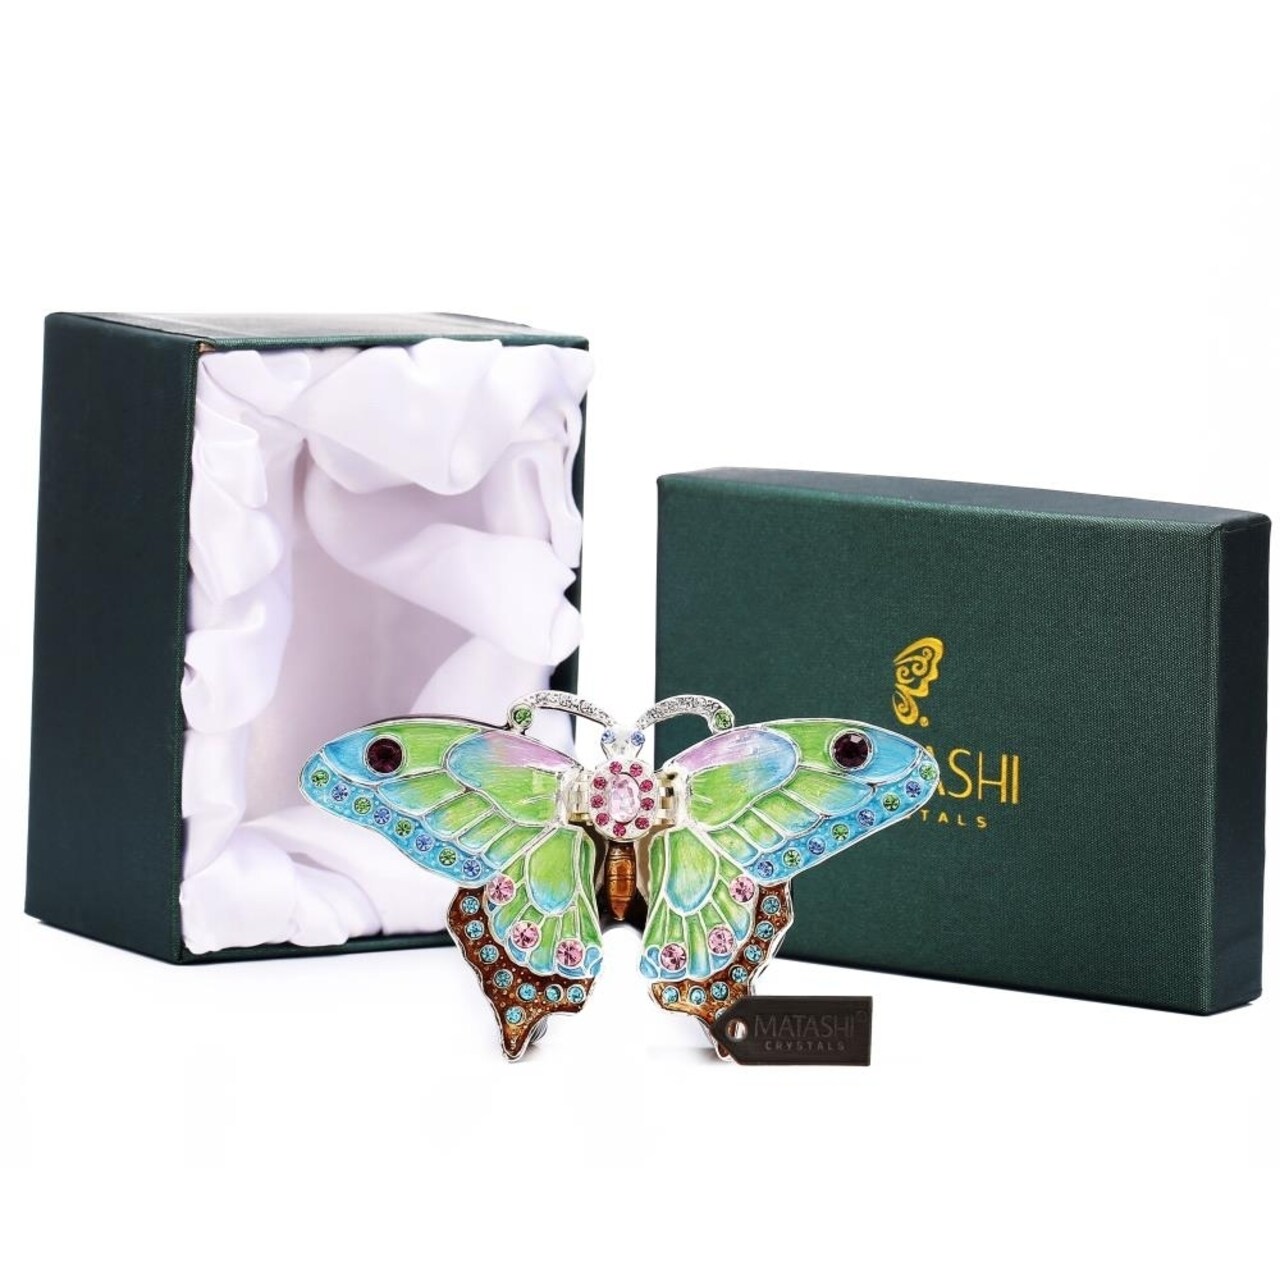 Matashi   Hand Painted Butterfly in Flight Ornament Embellished with 24K Gold and High Quality Crystals